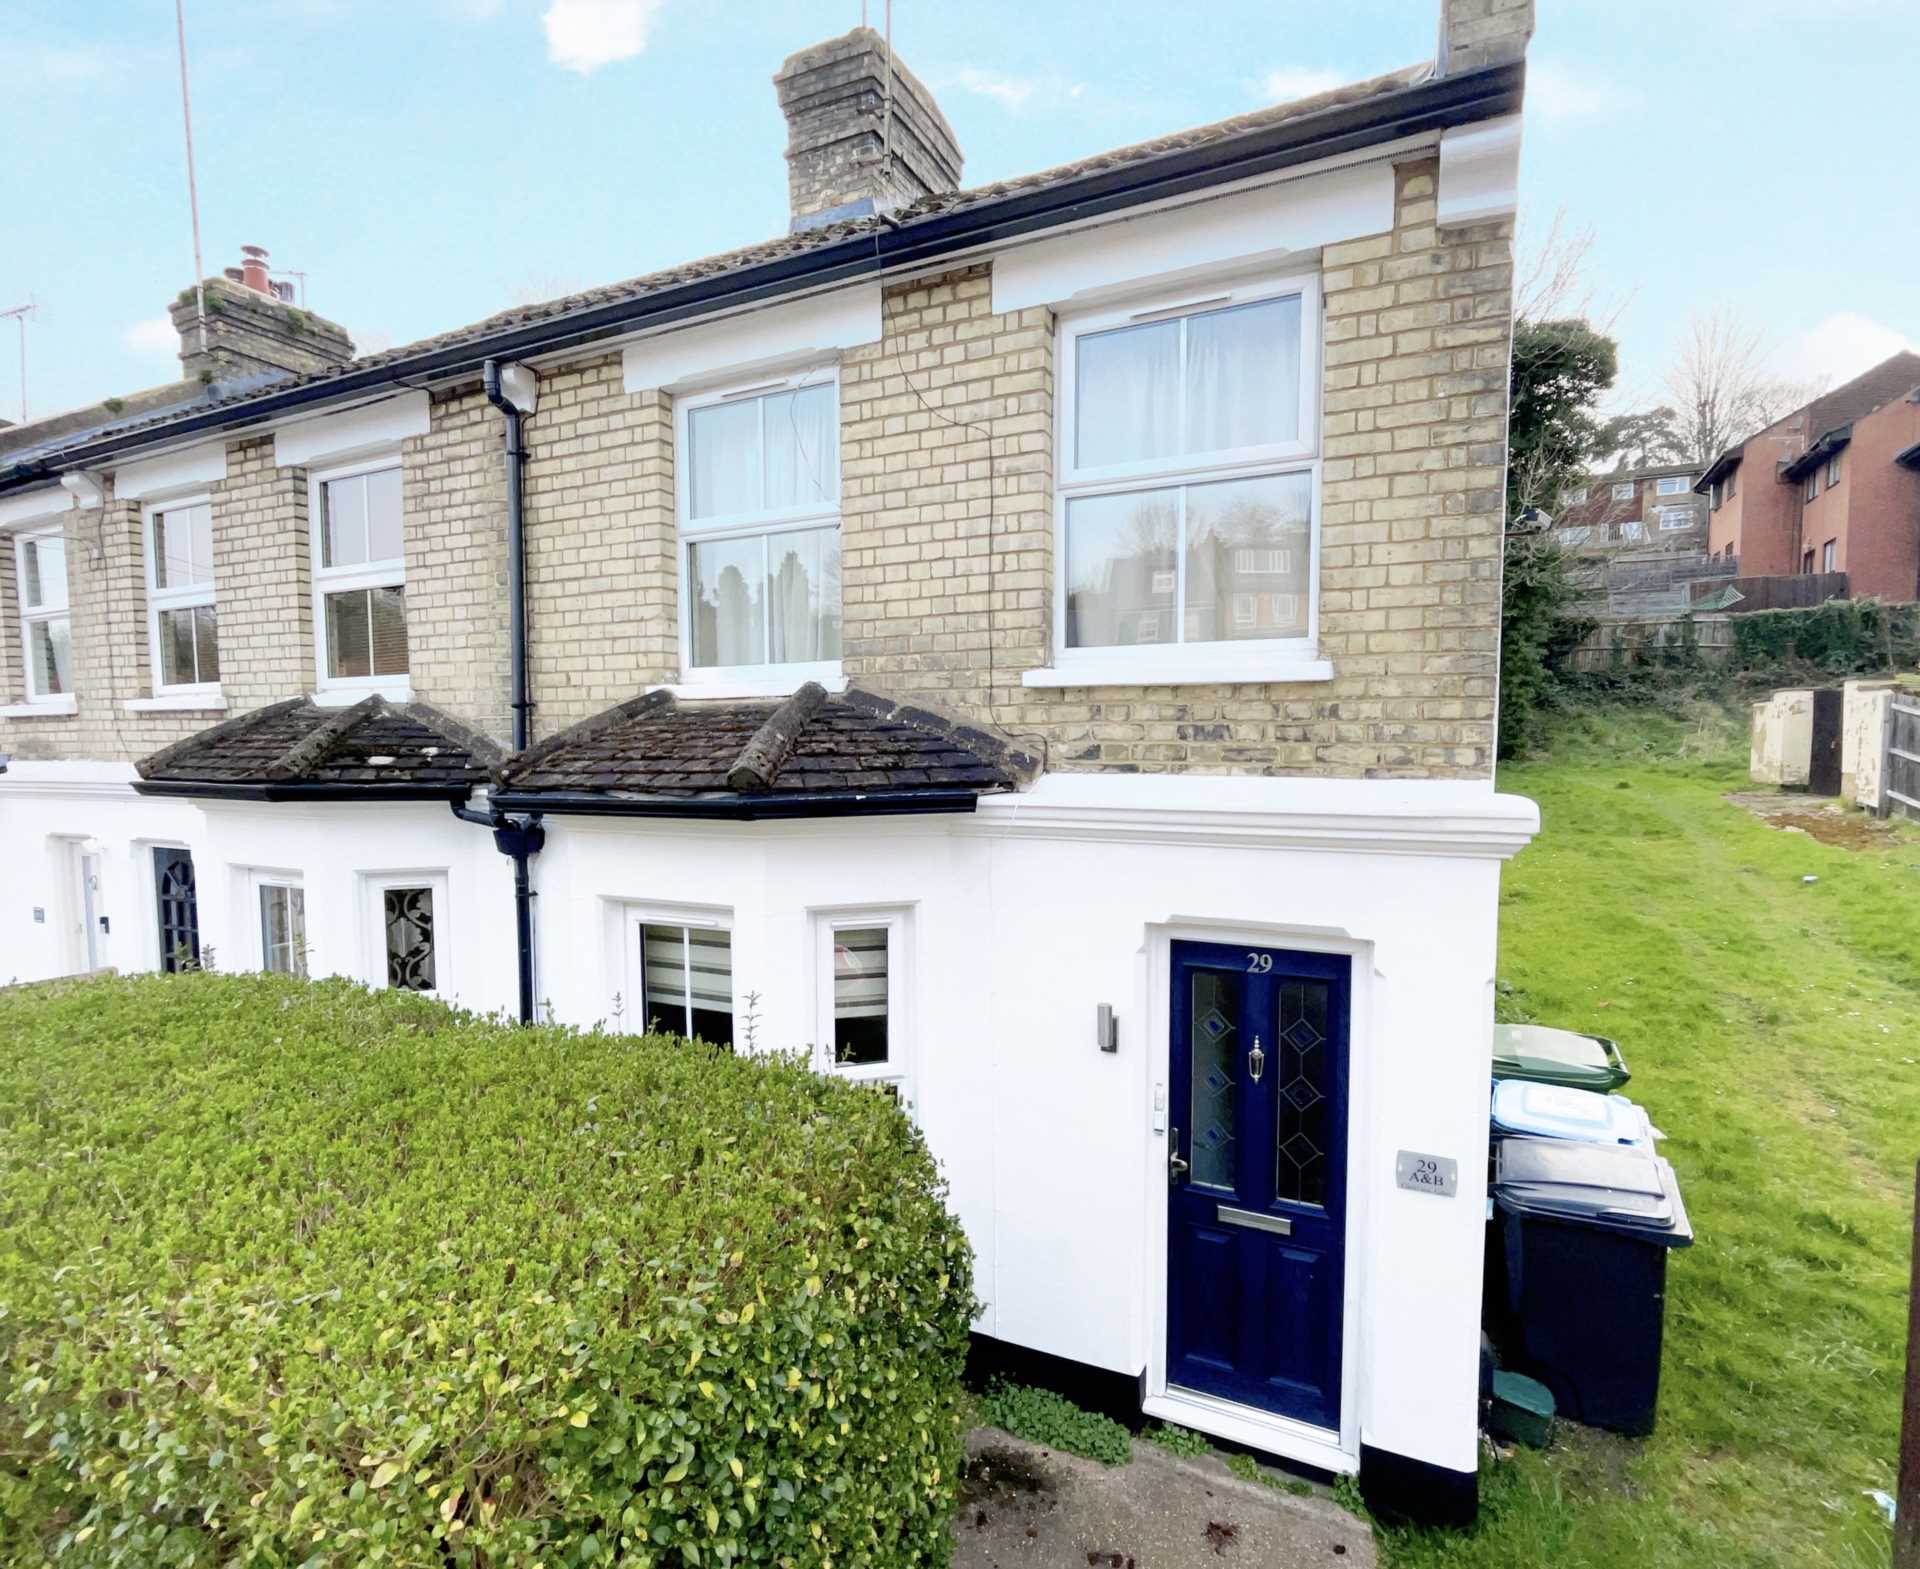 Refurbished Maisonette in Boxmoor, HP1, Unfurnished, Available from 07/05/22, Image 1